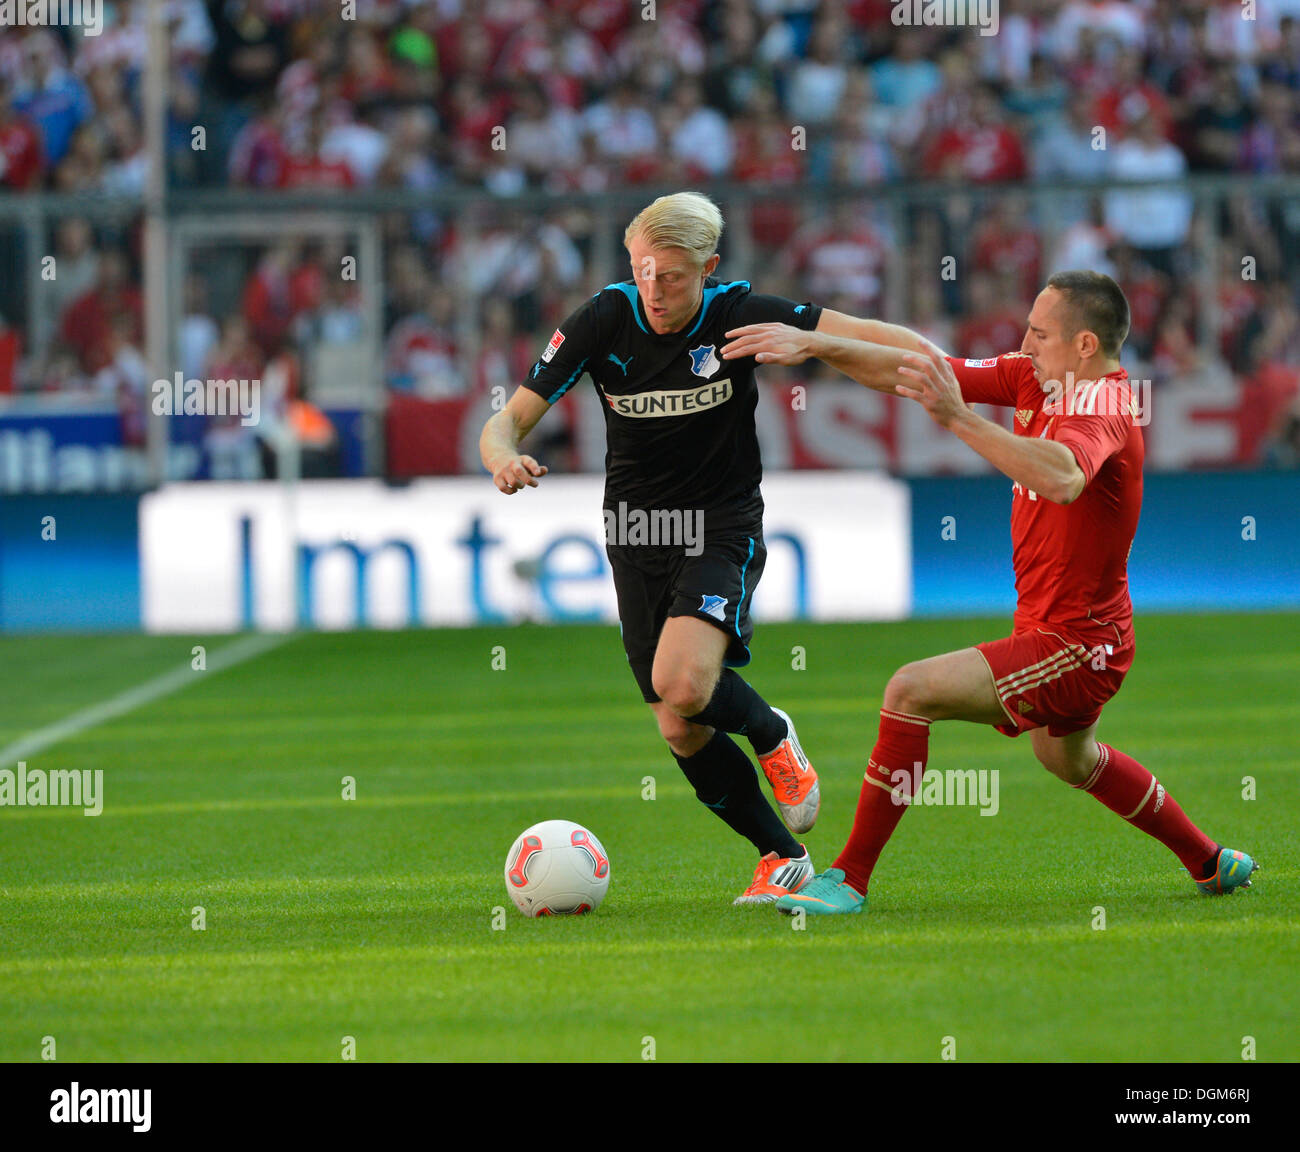 Tackle, Andreas Beck, TSG 1899 Hoffenheim, on the left, versus Franck Ribery, FC Bayern Munich, on the right, Allianz Arena Stock Photo